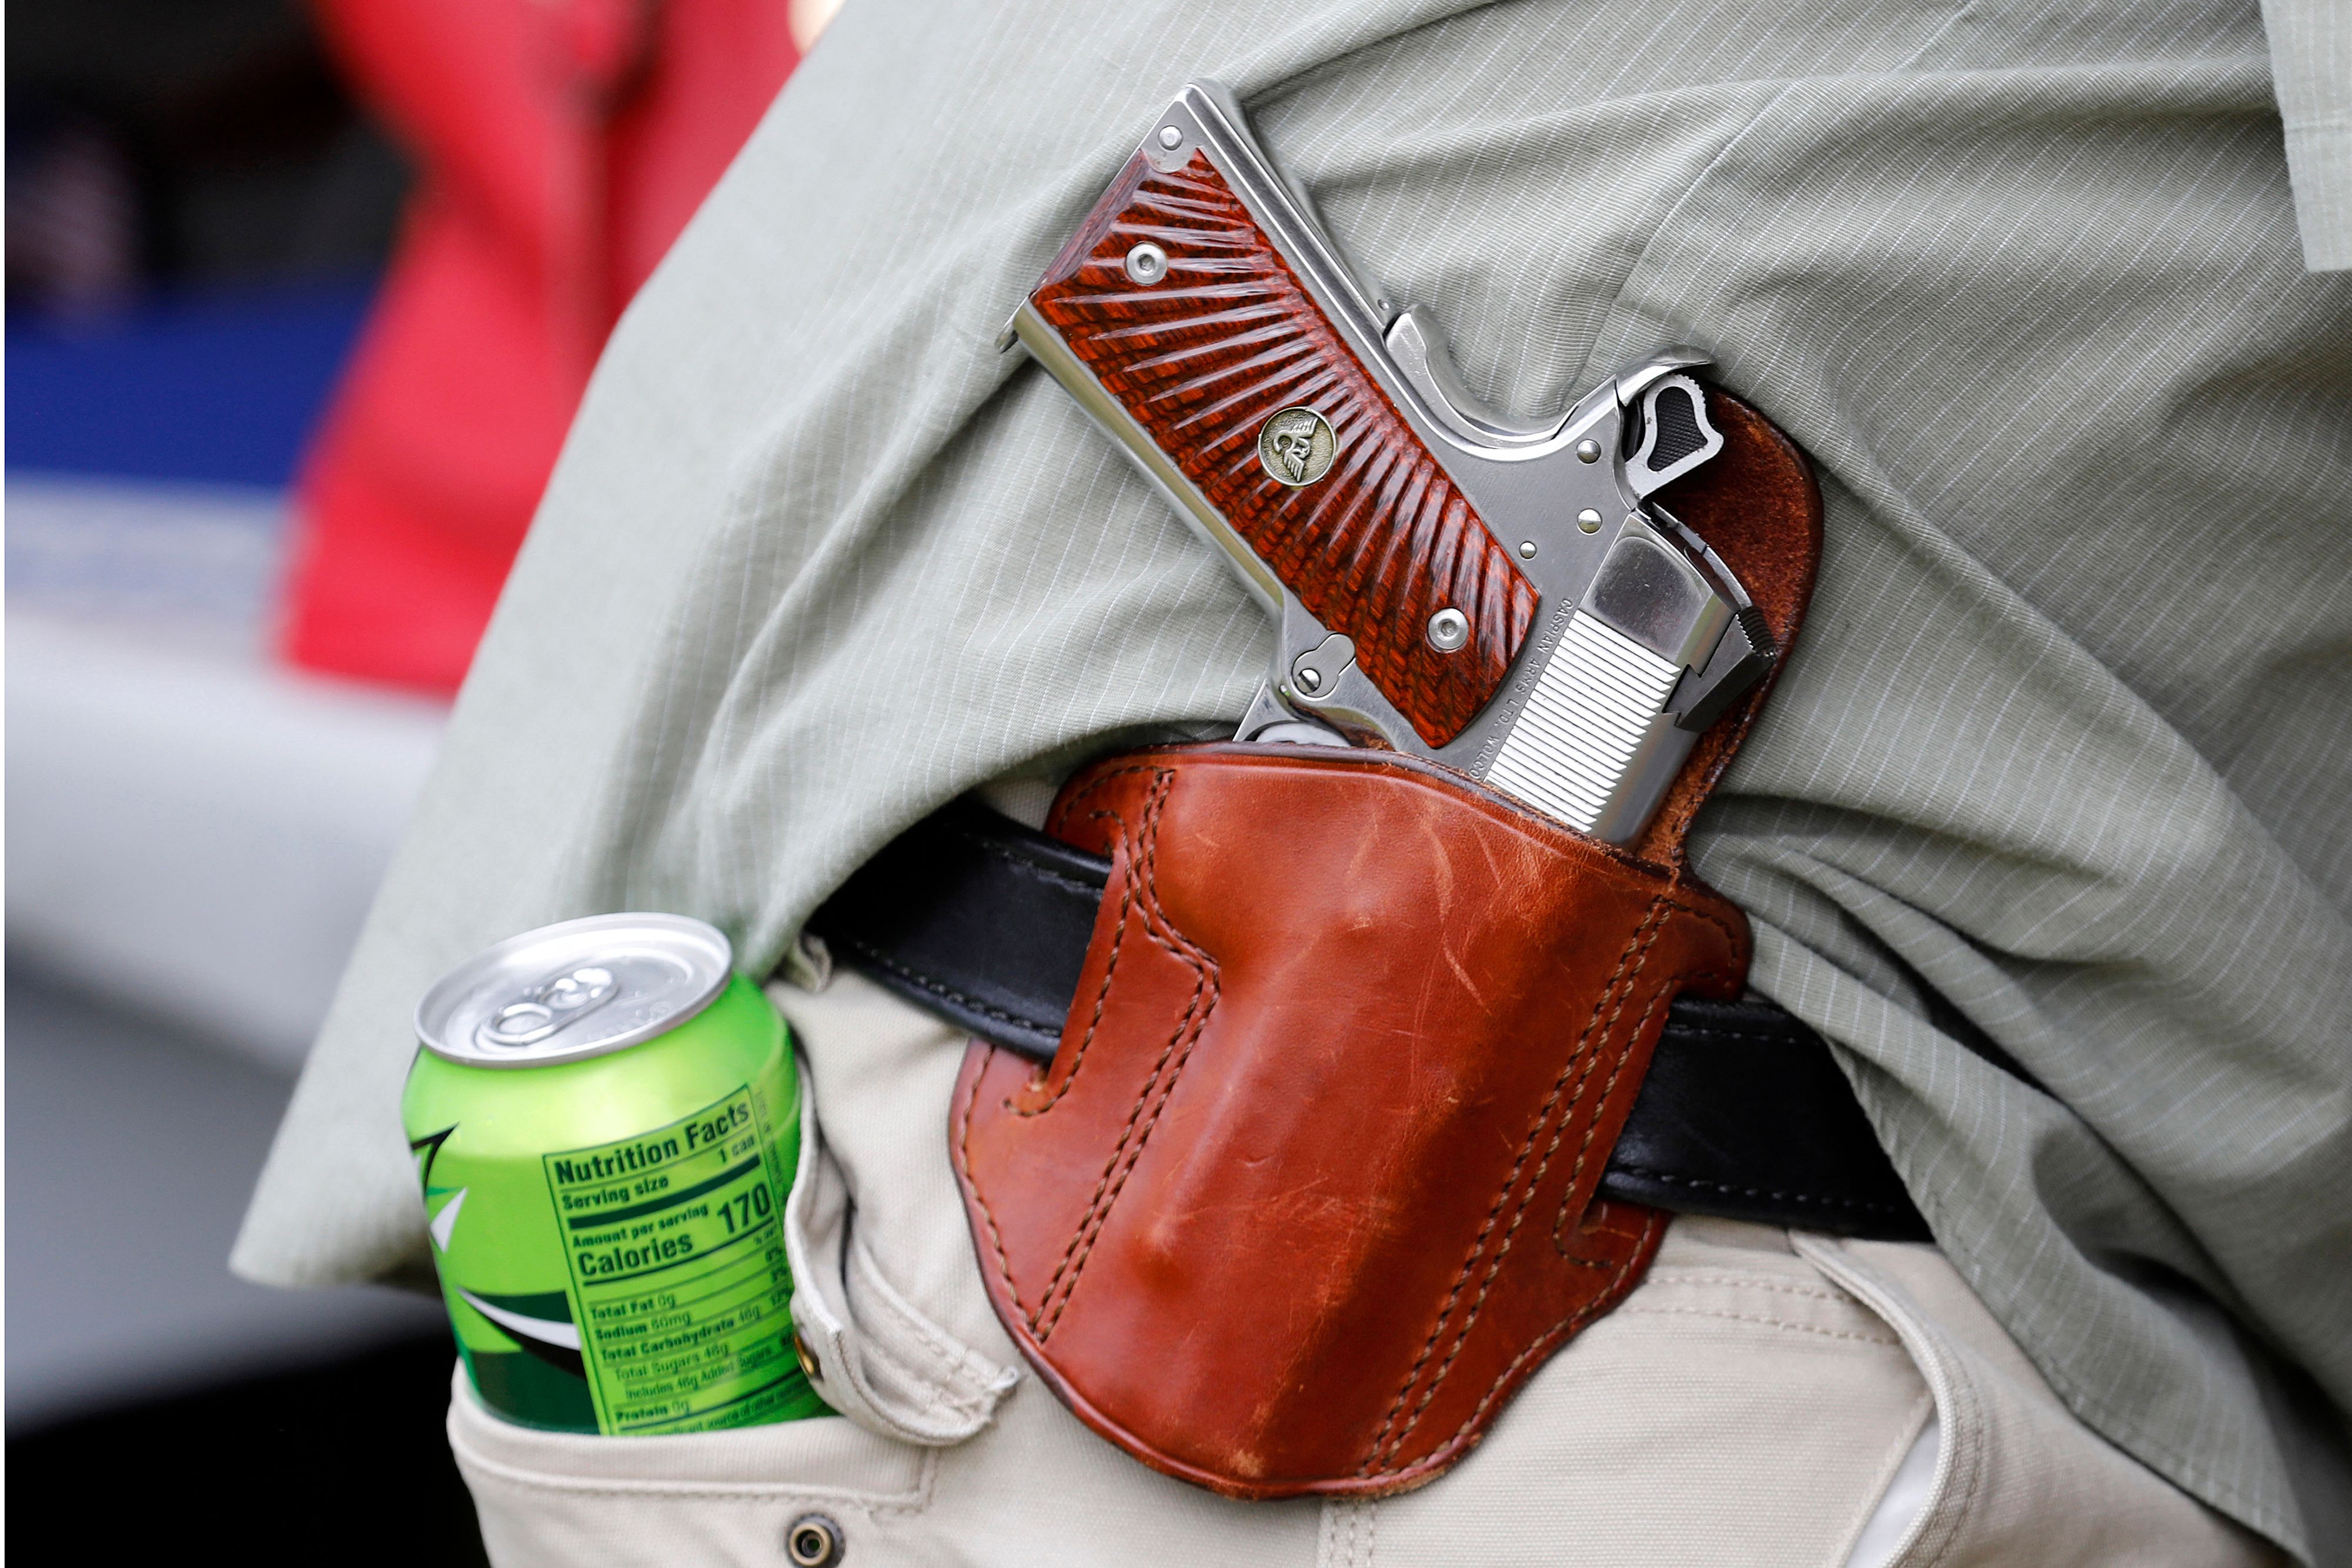 A demonstrator wears a gun on his belt during a rally supporting the 2nd Amendment in Fowlerville, Michigan on May 15, 2021. (Jeff Kowalsky—AFP/ Getty Images)